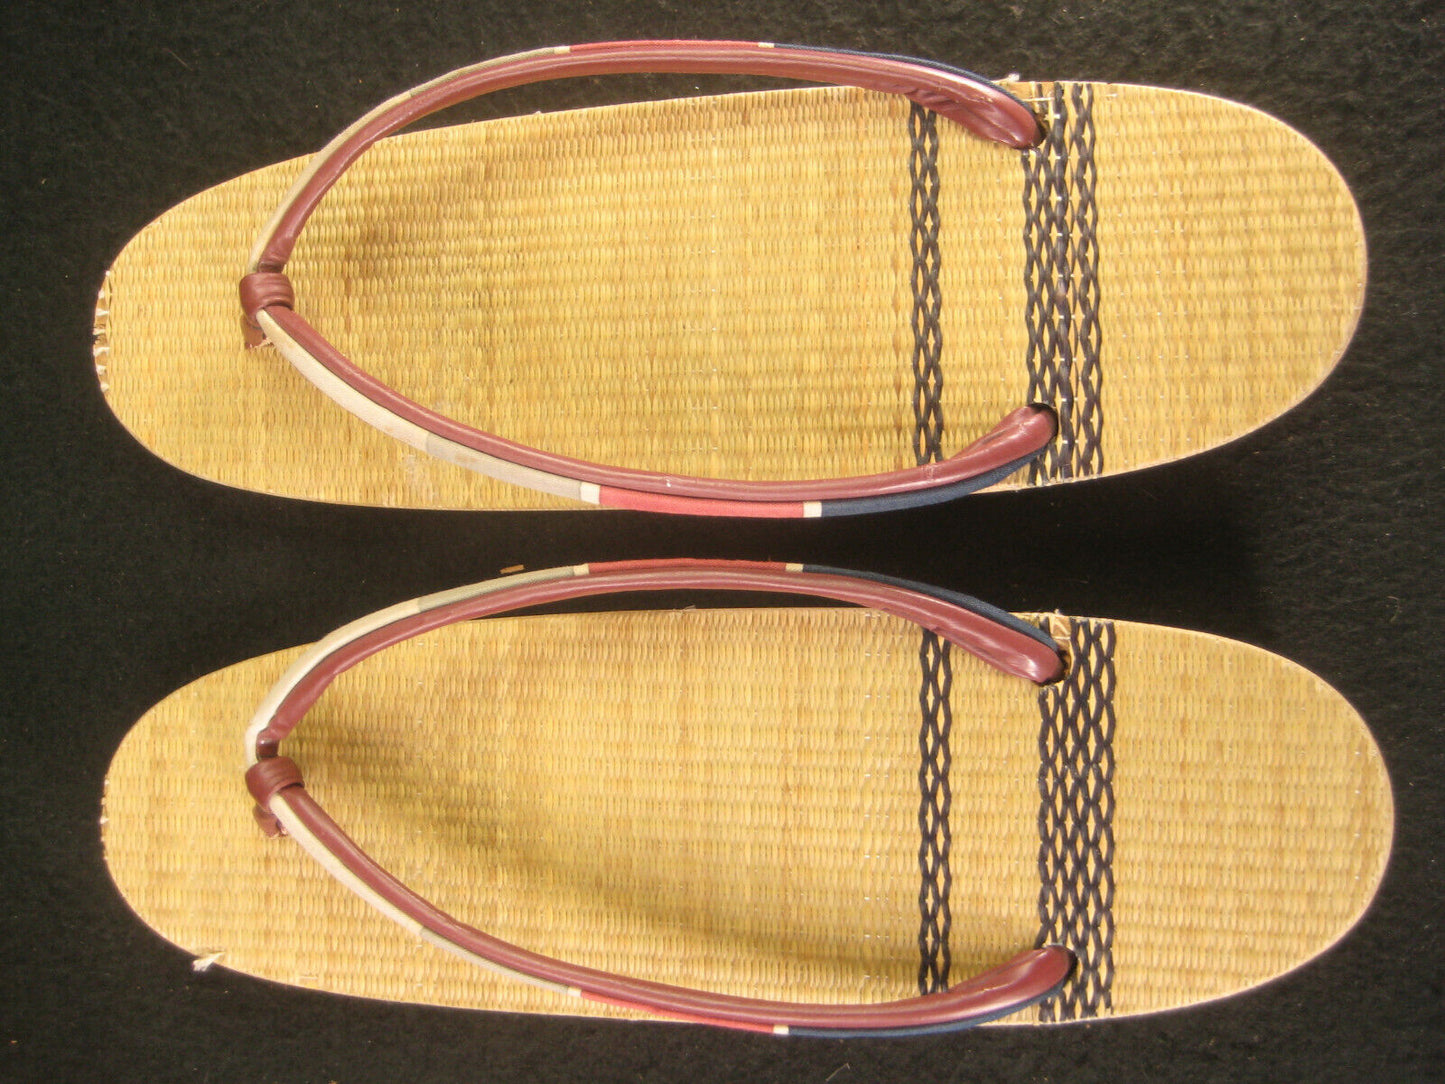 Setta Shoes Sandles FormalMade Of Rice Straw Footbed Leather Sole 9" L 3"W